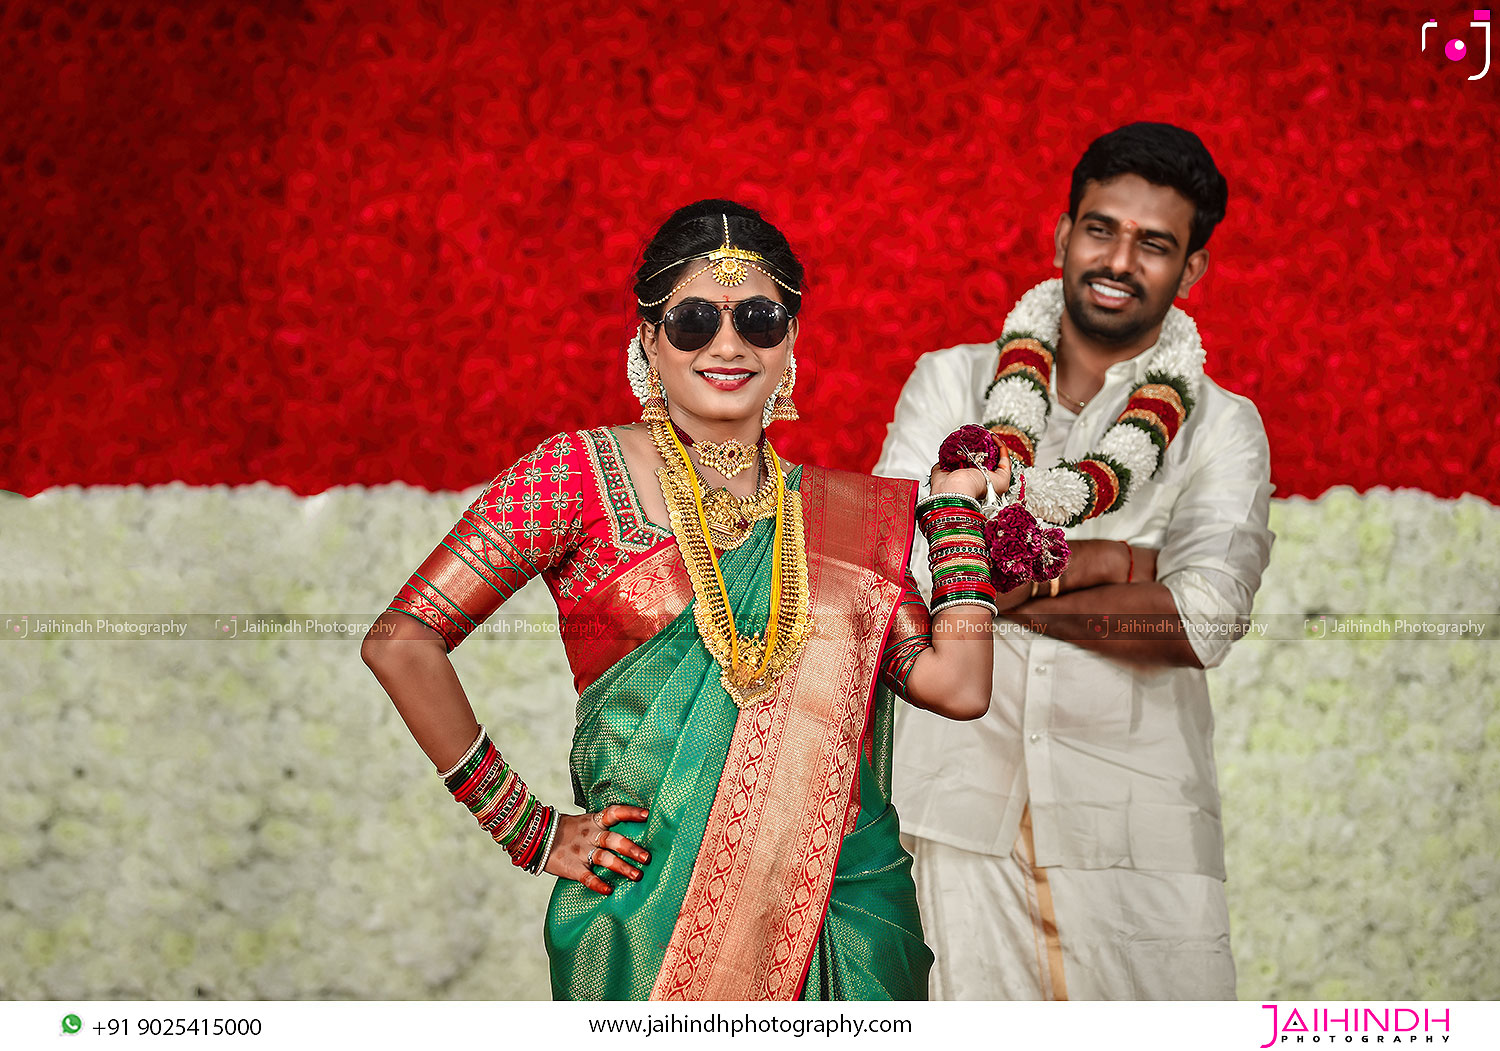 Vj Photokadai 📸 | Best Candid Wedding Photographer in Erode. We're  specialized in Wedding, Engagement, Candid photography and videography,  Outdoor couple shoots, Family events, Gettogether coverage along with  Videography.